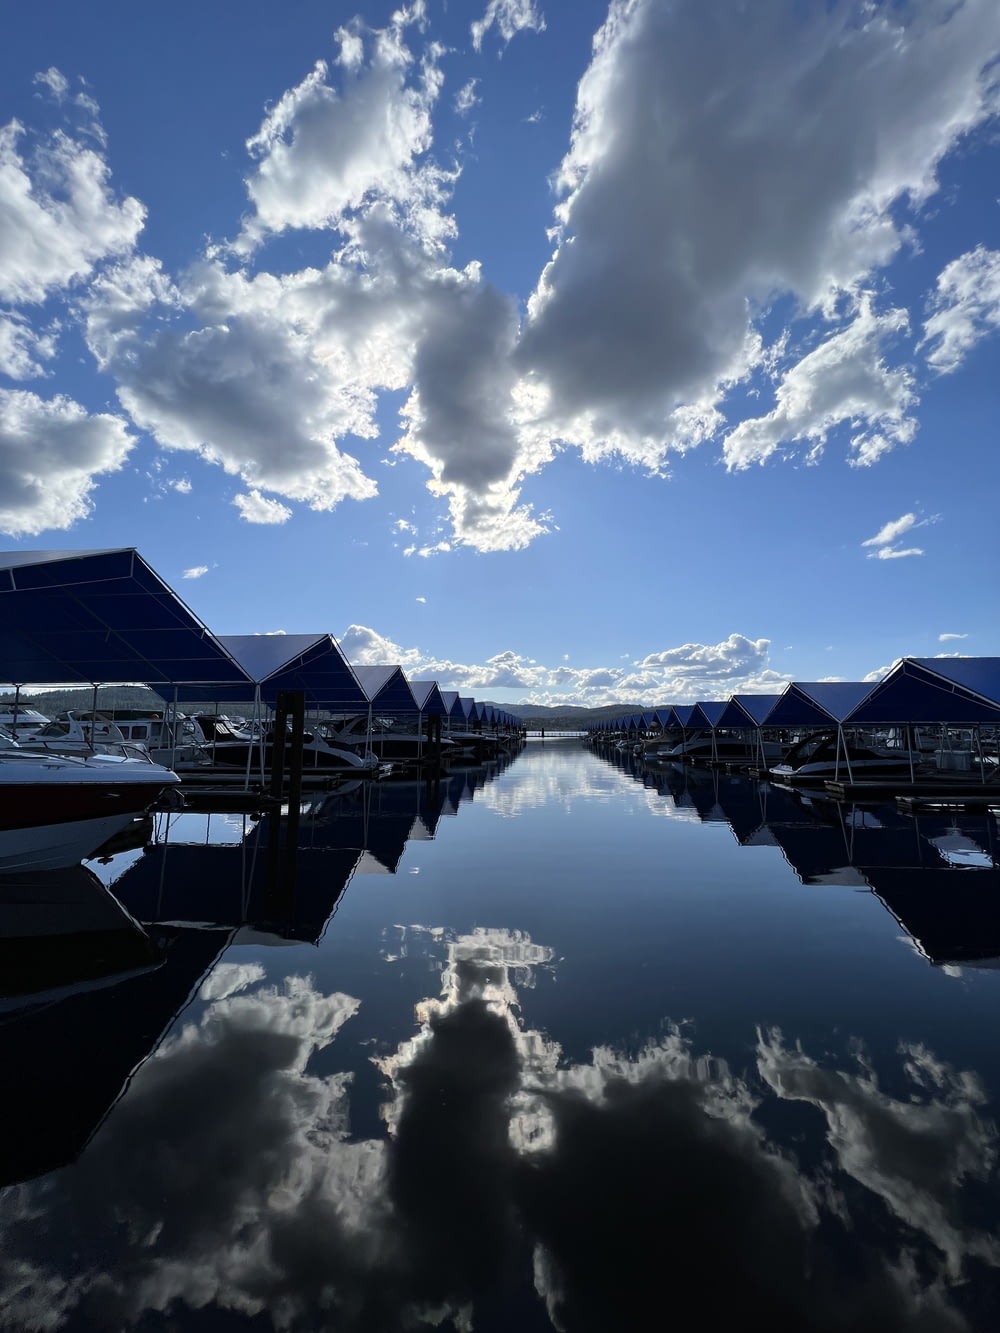 a body of water surrounded by boats under a cloudy blue sky